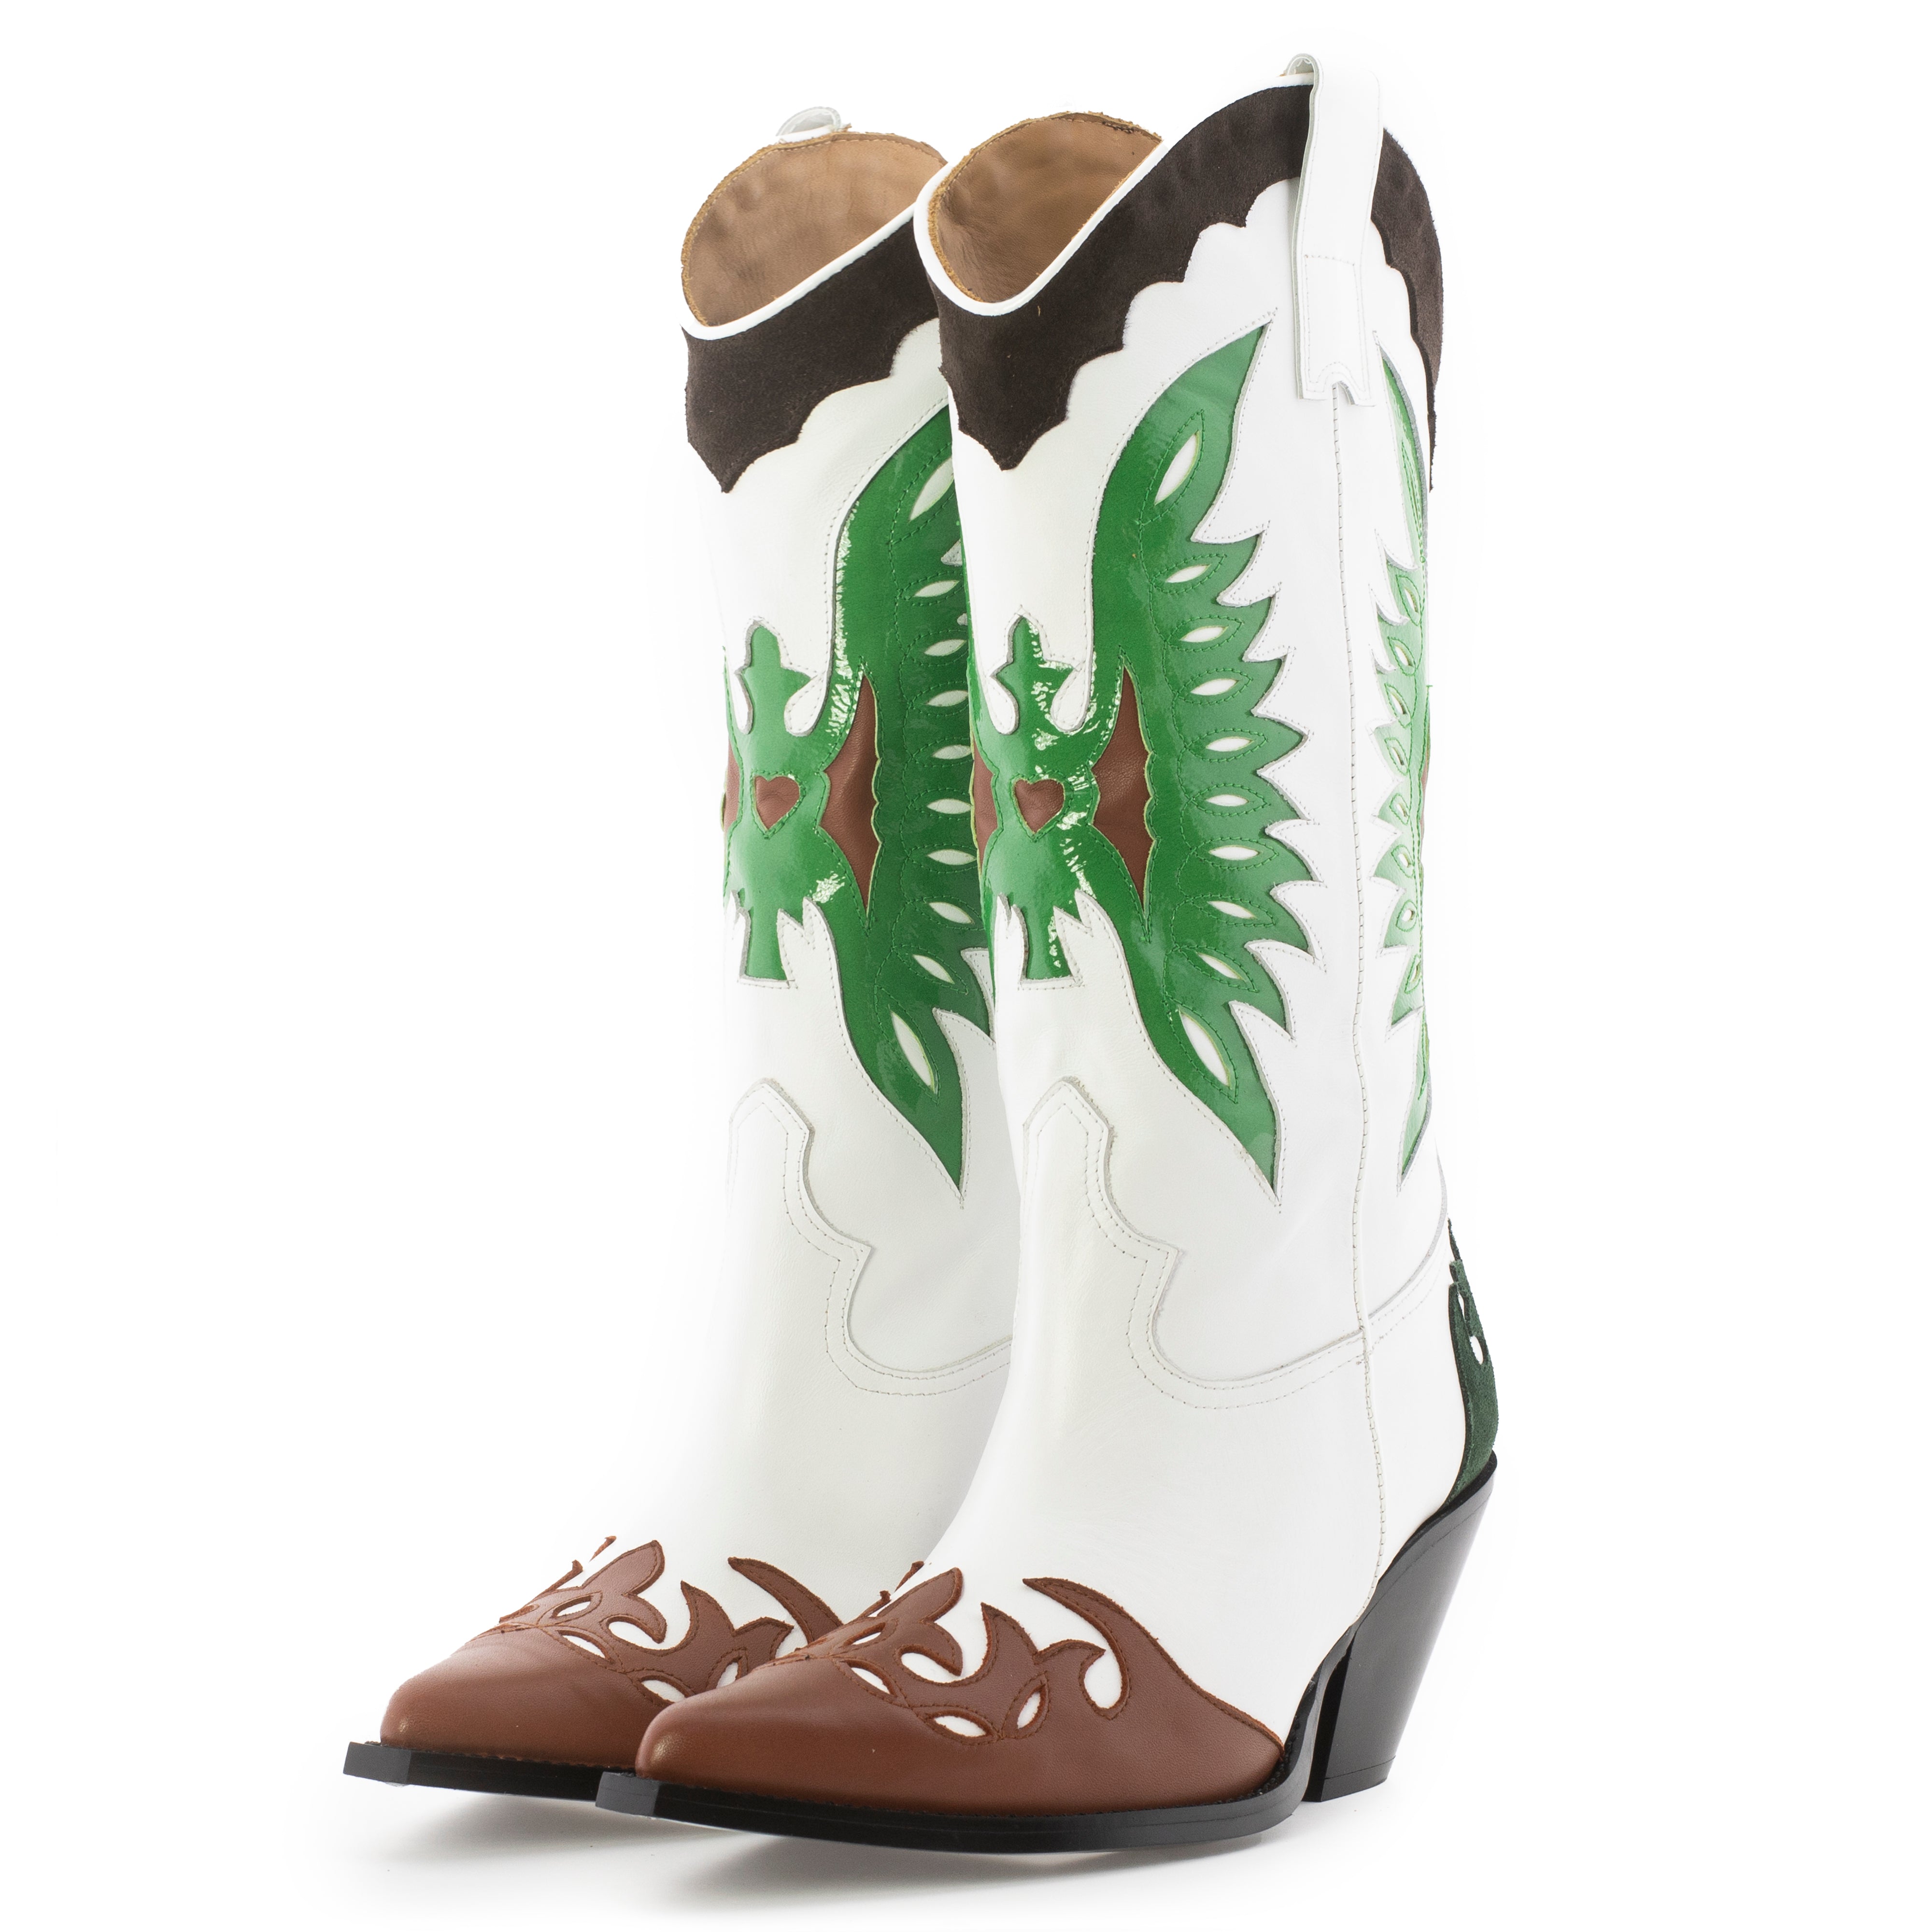 FAR WHITE AND GREEN BOOT